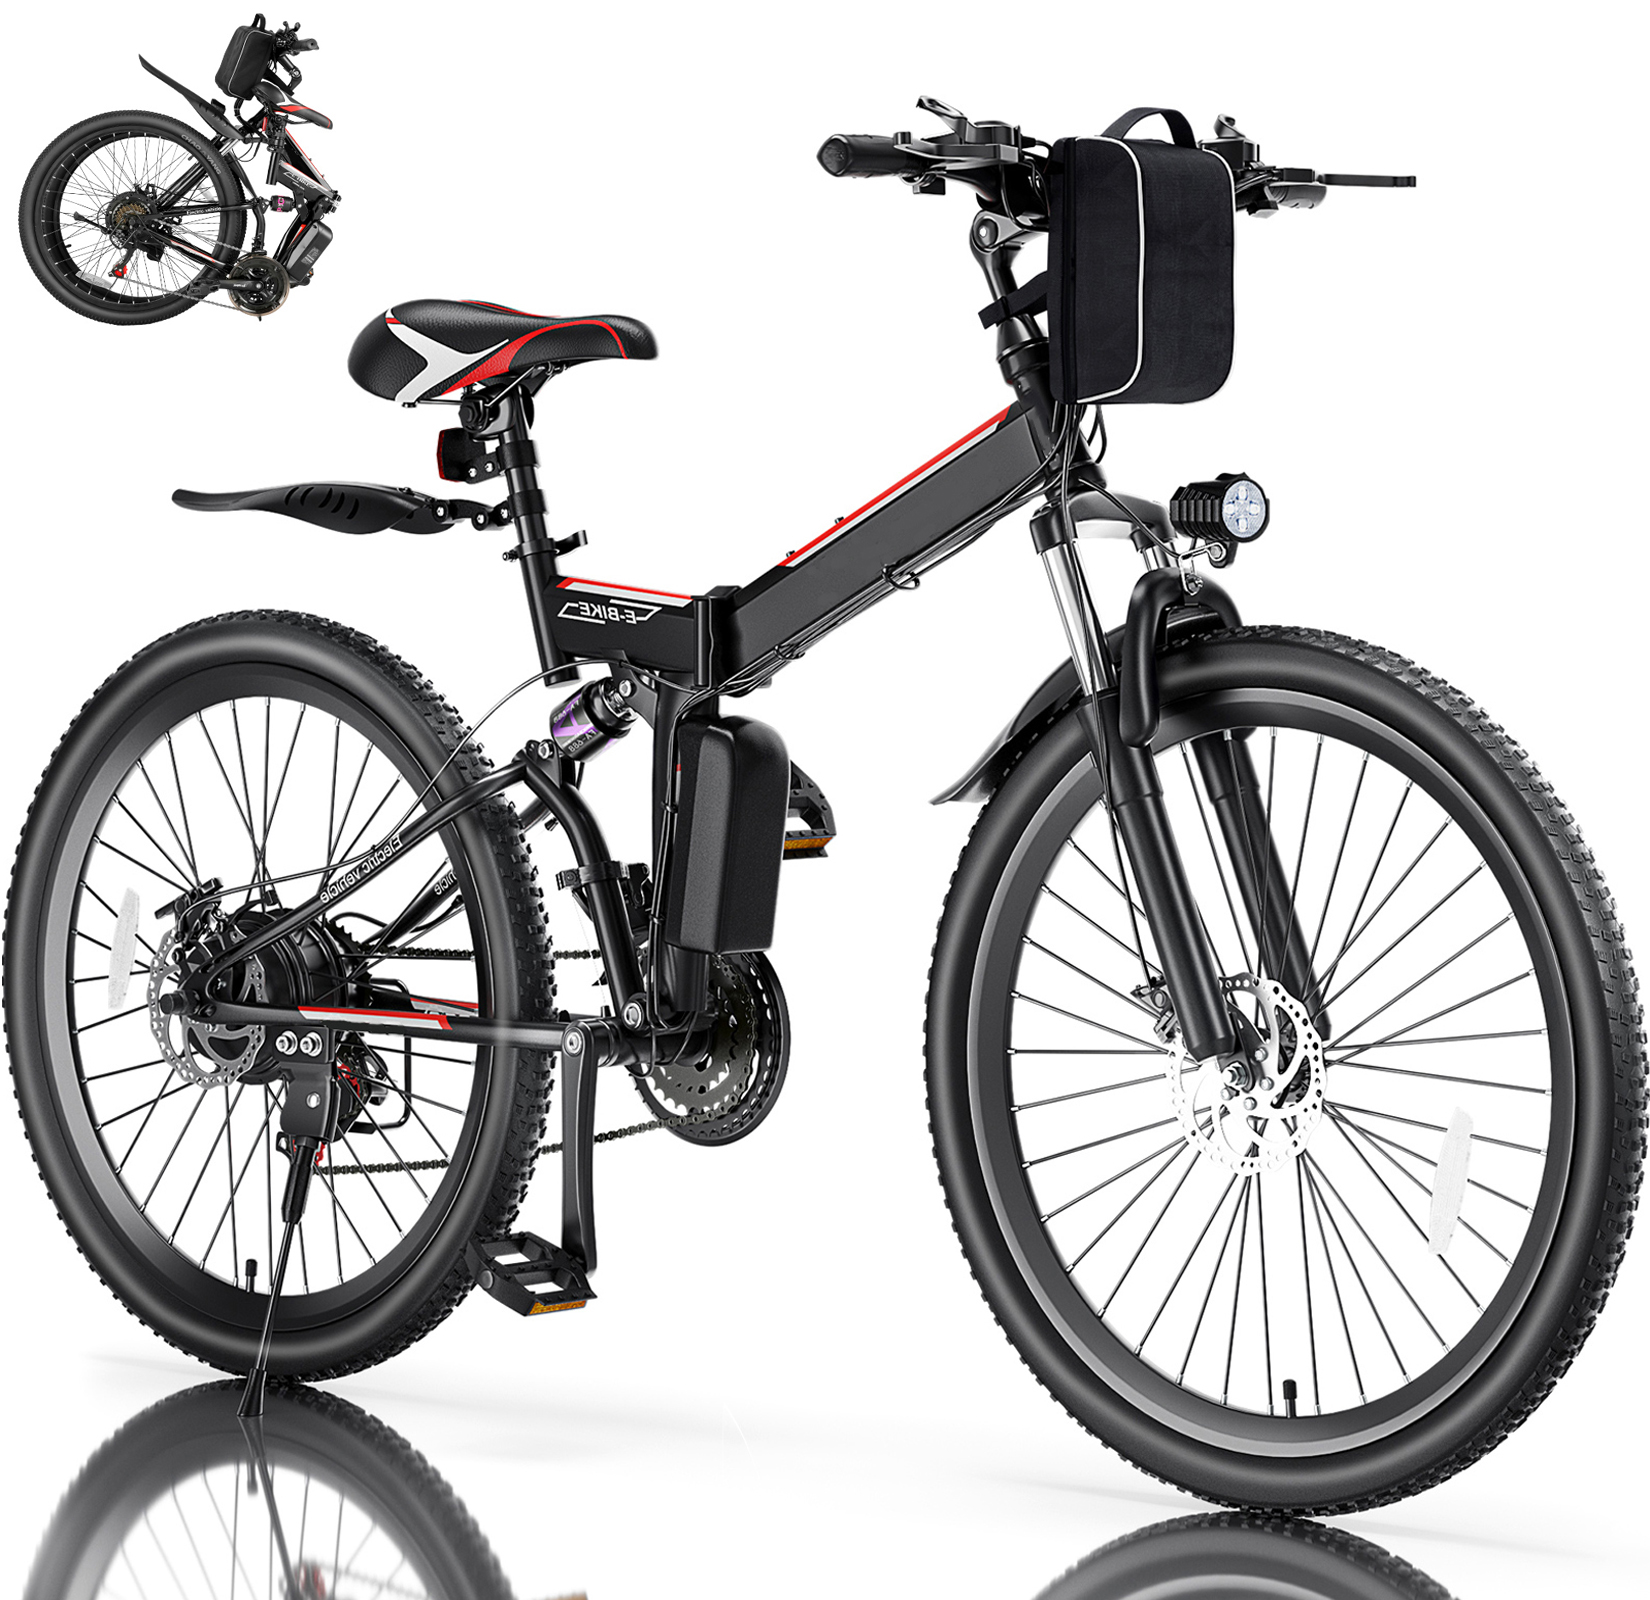 Elifine 500W 26" Electric Bike Folding Electric Mountain Bike for Adults, 48V 7.8Ah Battery Foldable Ebike, 21 Speed, Full Suspension Commuter E-bikes for Men Women with 5 Riding Modes, UL2849 - image 1 of 11